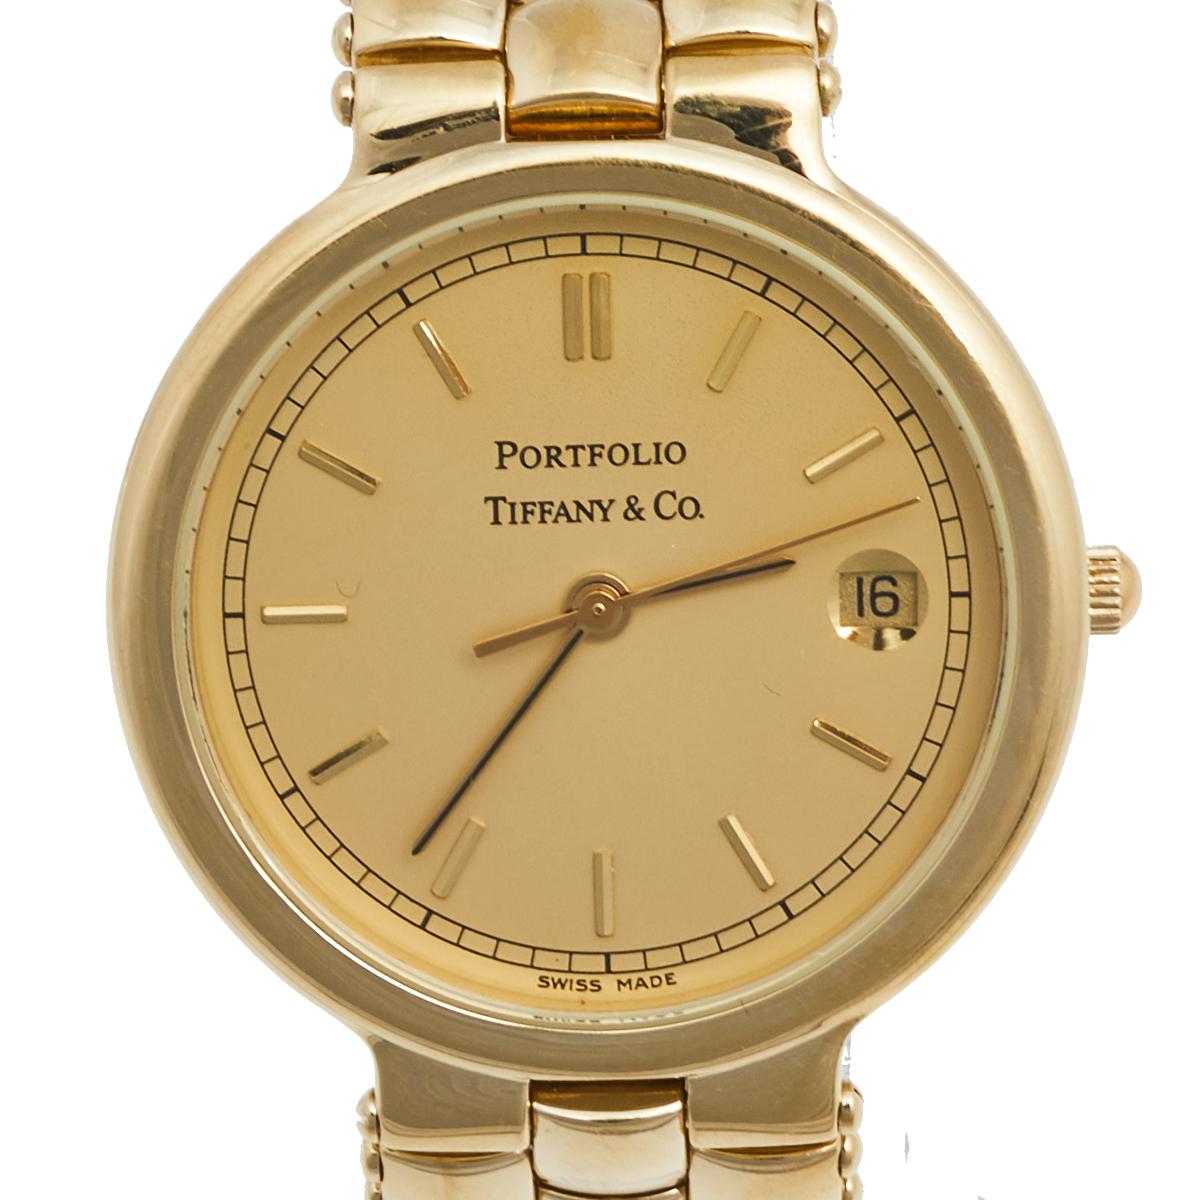 Here we have a watch called 'Portfolio' from a brand revered by luxury lovers for decades. It arrives in a gold-plated stainless steel body with a round case. On the case is a smooth dial that has stick hour markers, minute markers around the outer